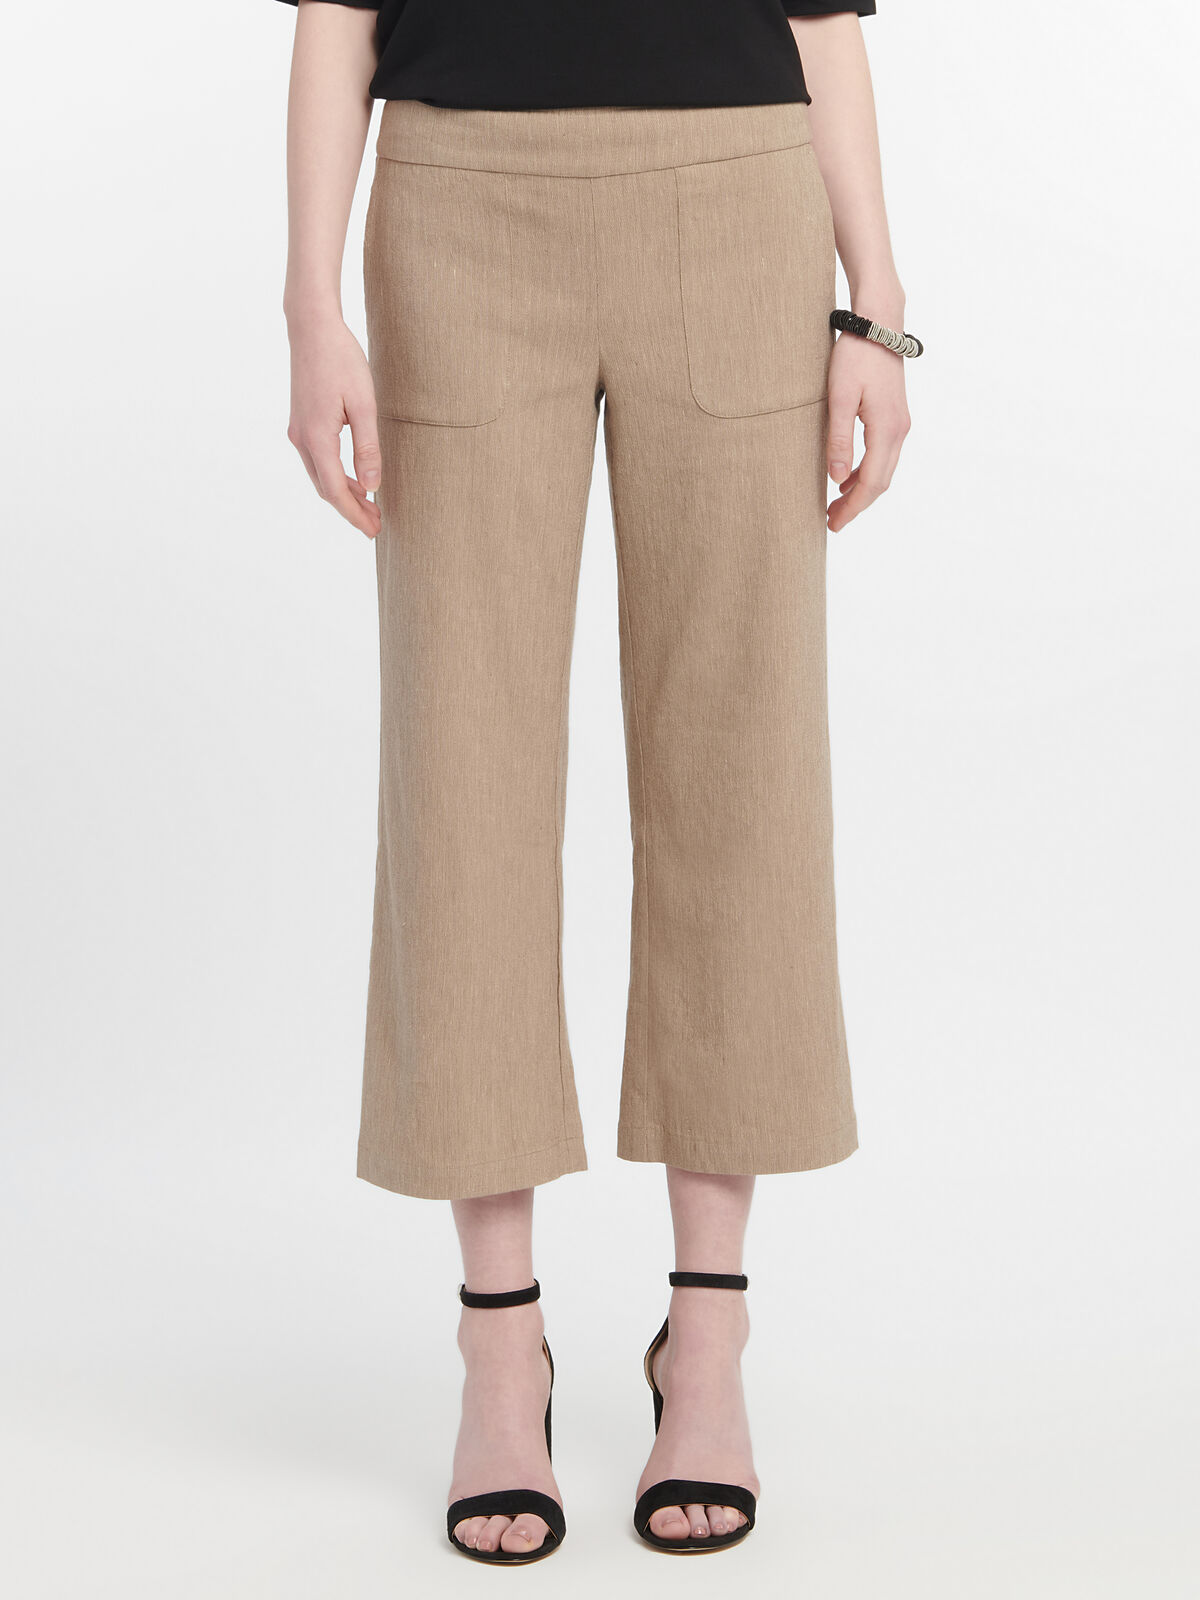 Here Or There Crop Pant